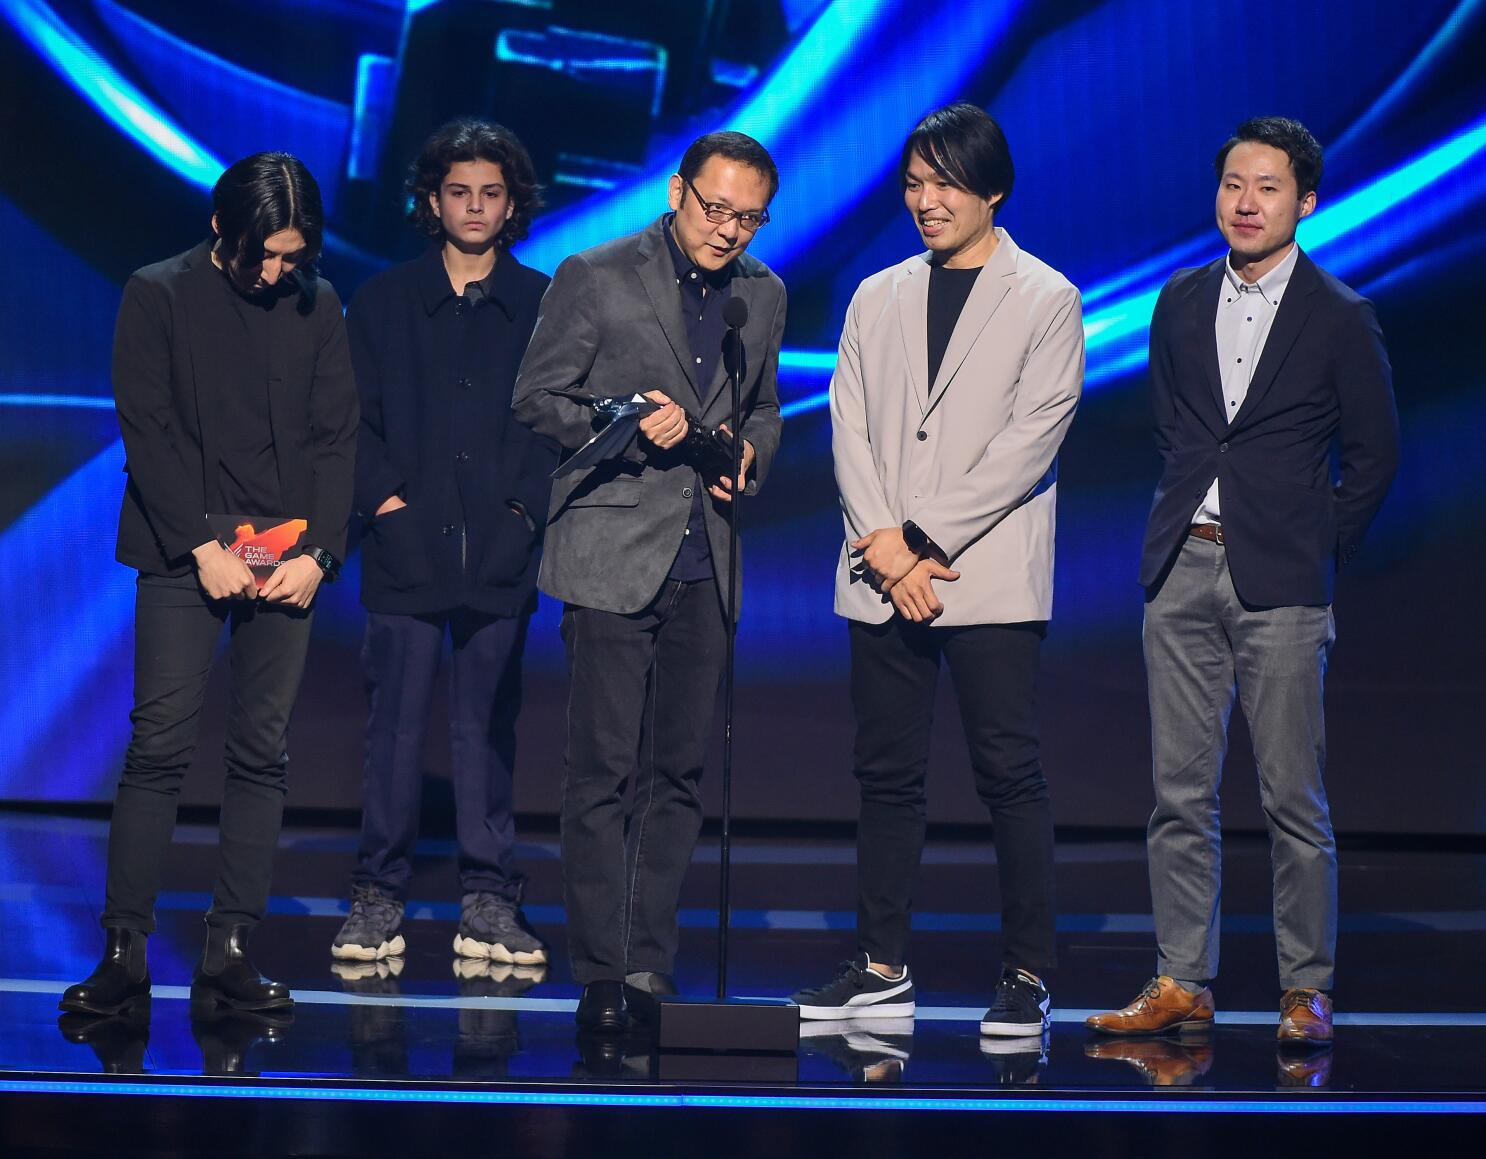 Student Game Awards Submissions Now Open, News